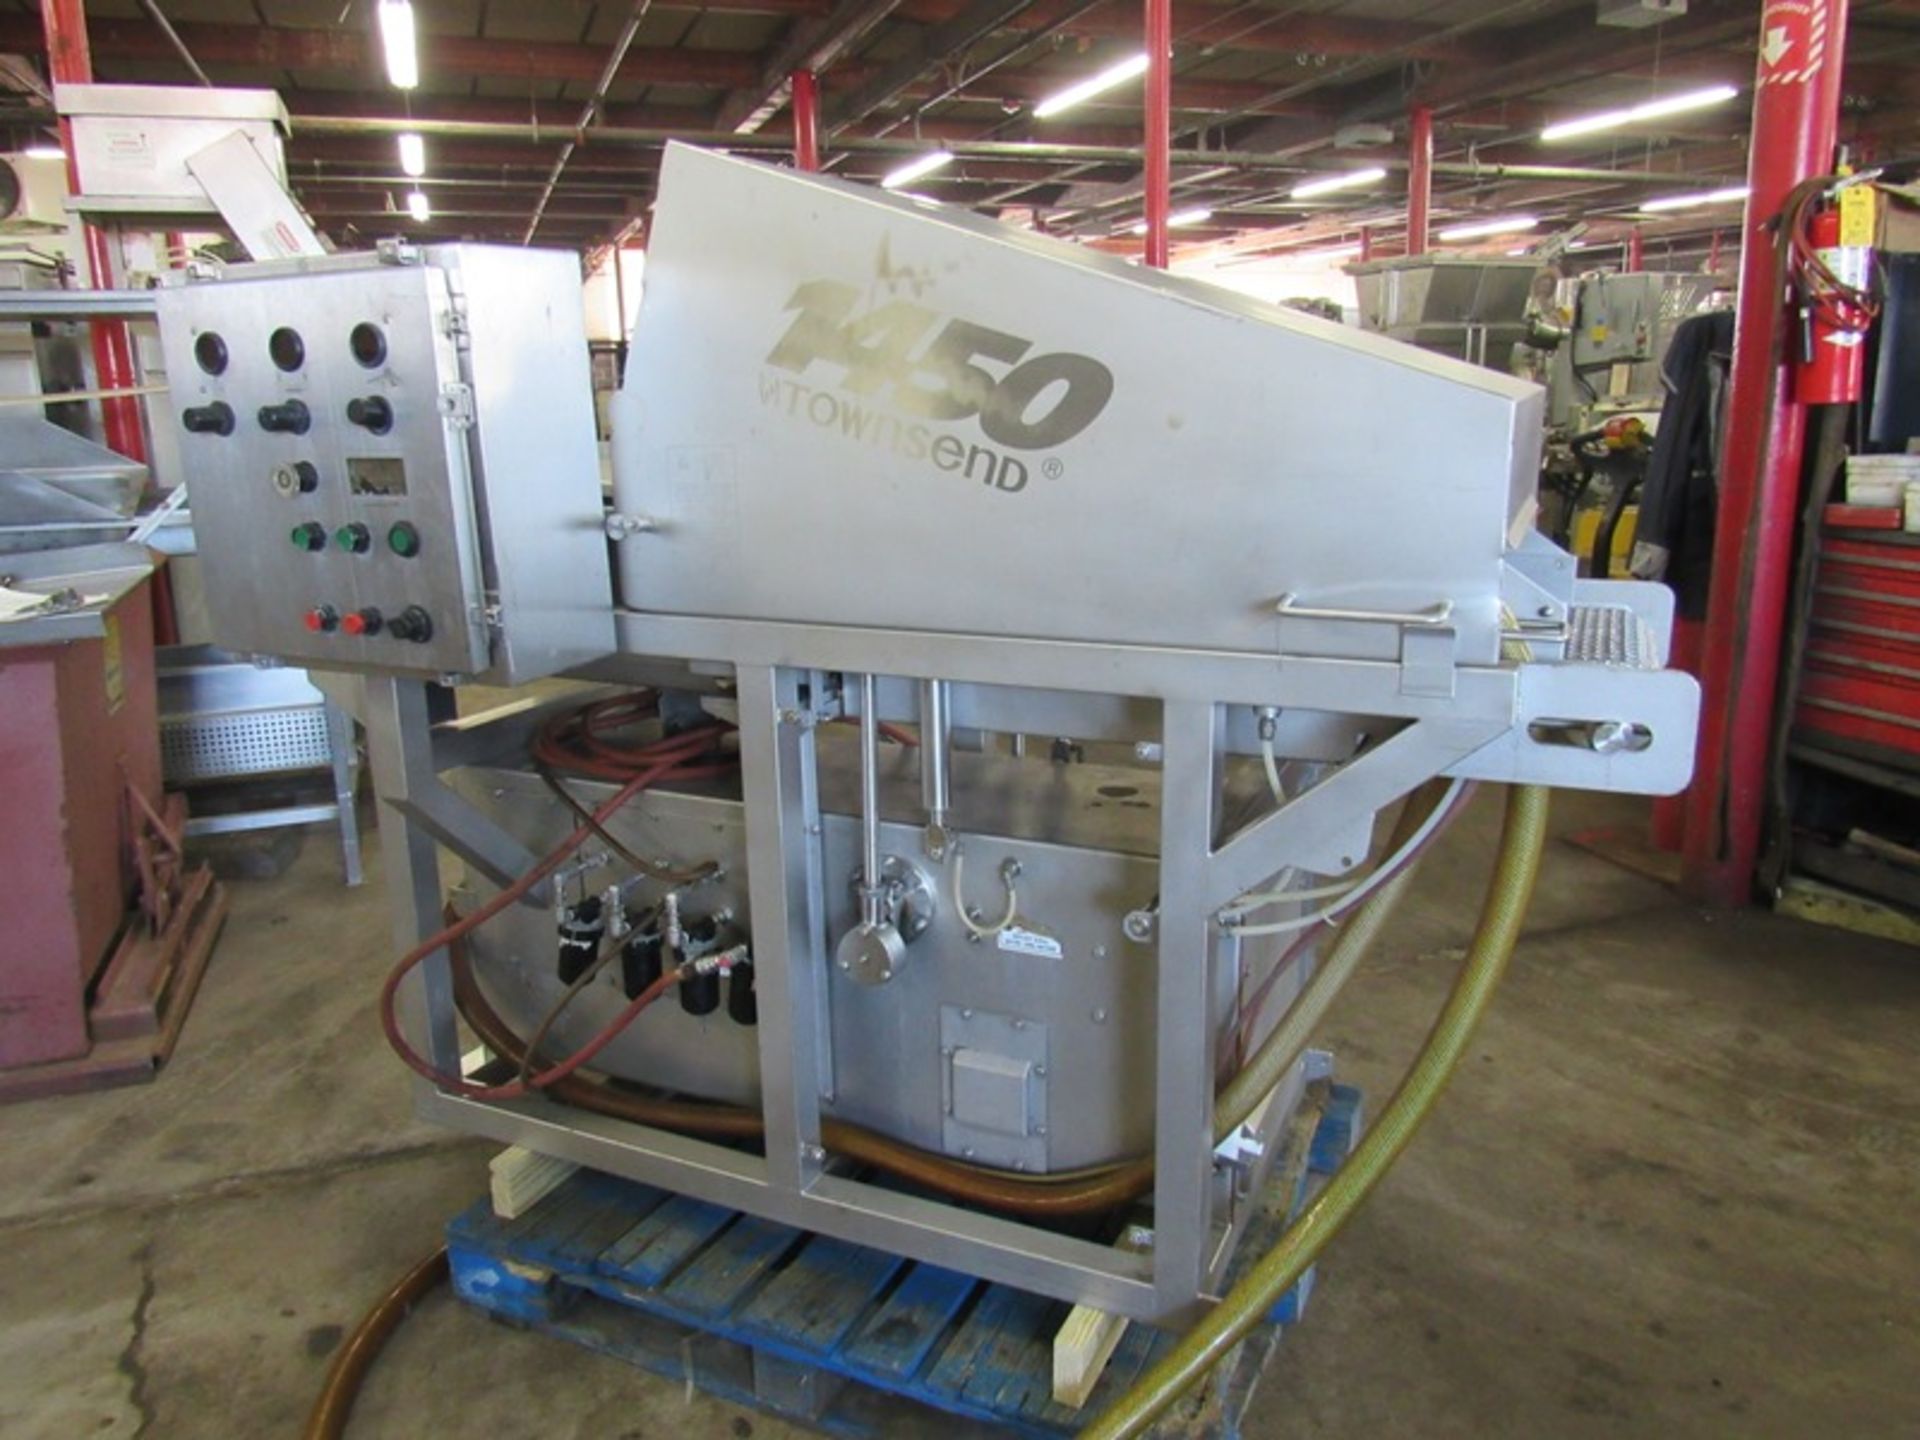 Townsend Mdl. 1450 Brine Injector, 14" W X 6' L stainless steel conveyor, stainless steel portable